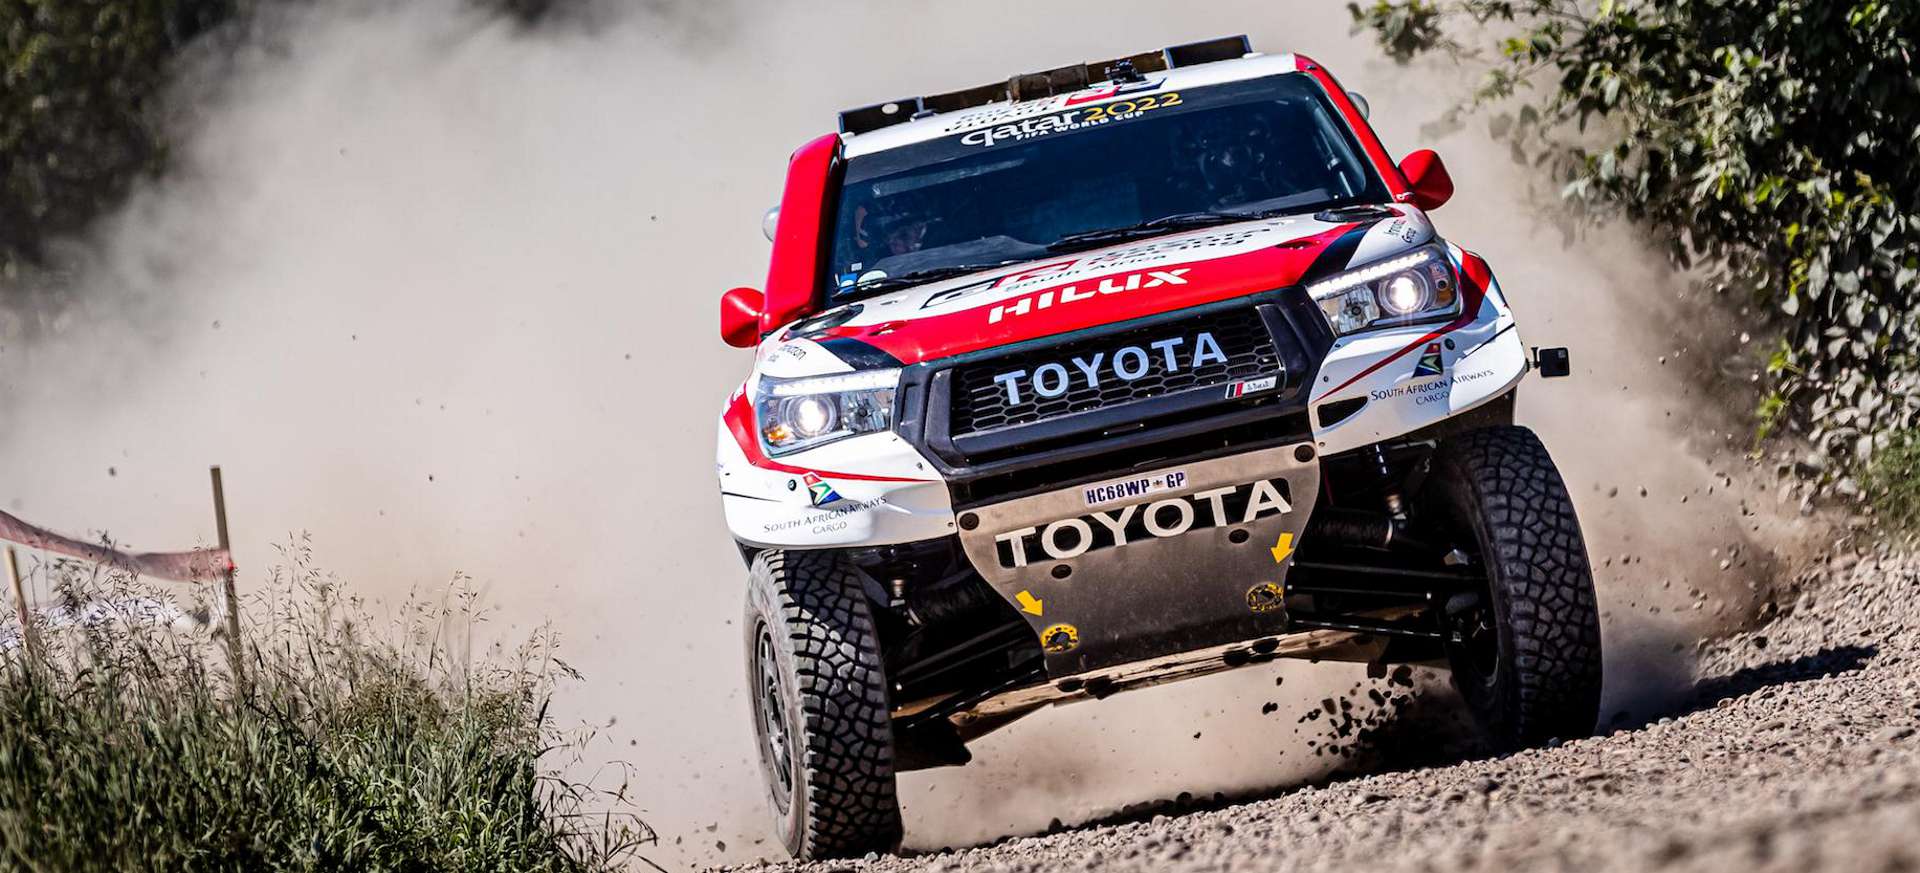 Silk Way Rally 2019: Overdrive Racing's Al-Attiyah and Al-Rahji hold first and third after short opening stage